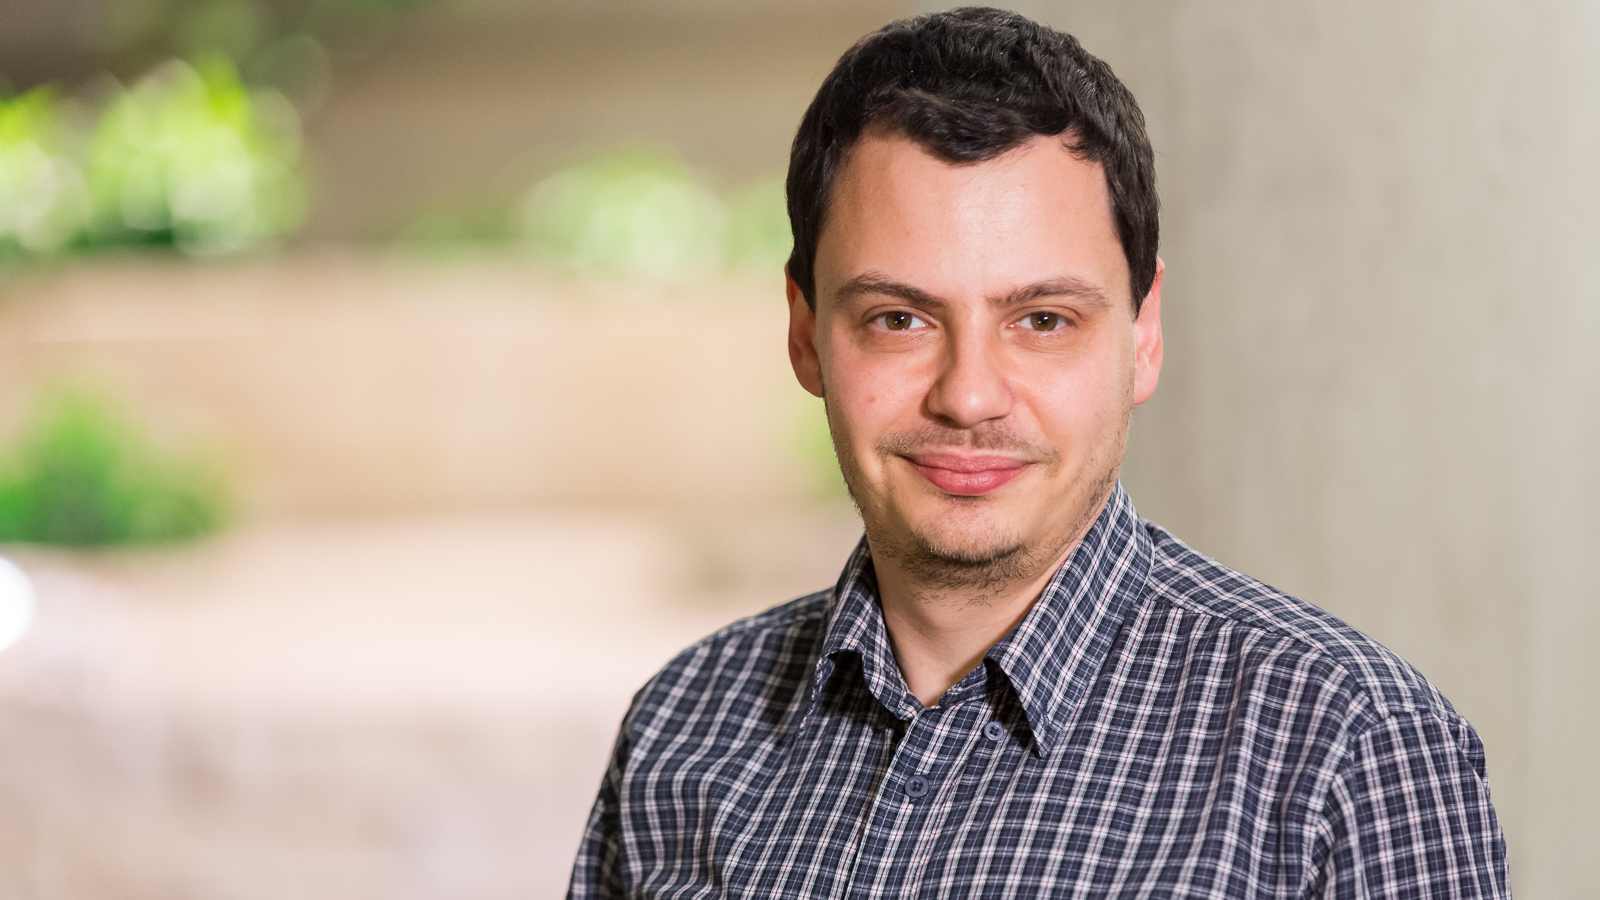 Bogdan Nicolae is a computer scientist in Argonne’s MCS division whose research will enable scientists to extract meaningful insight from large data sets. (Image by Argonne National Laboratory.)